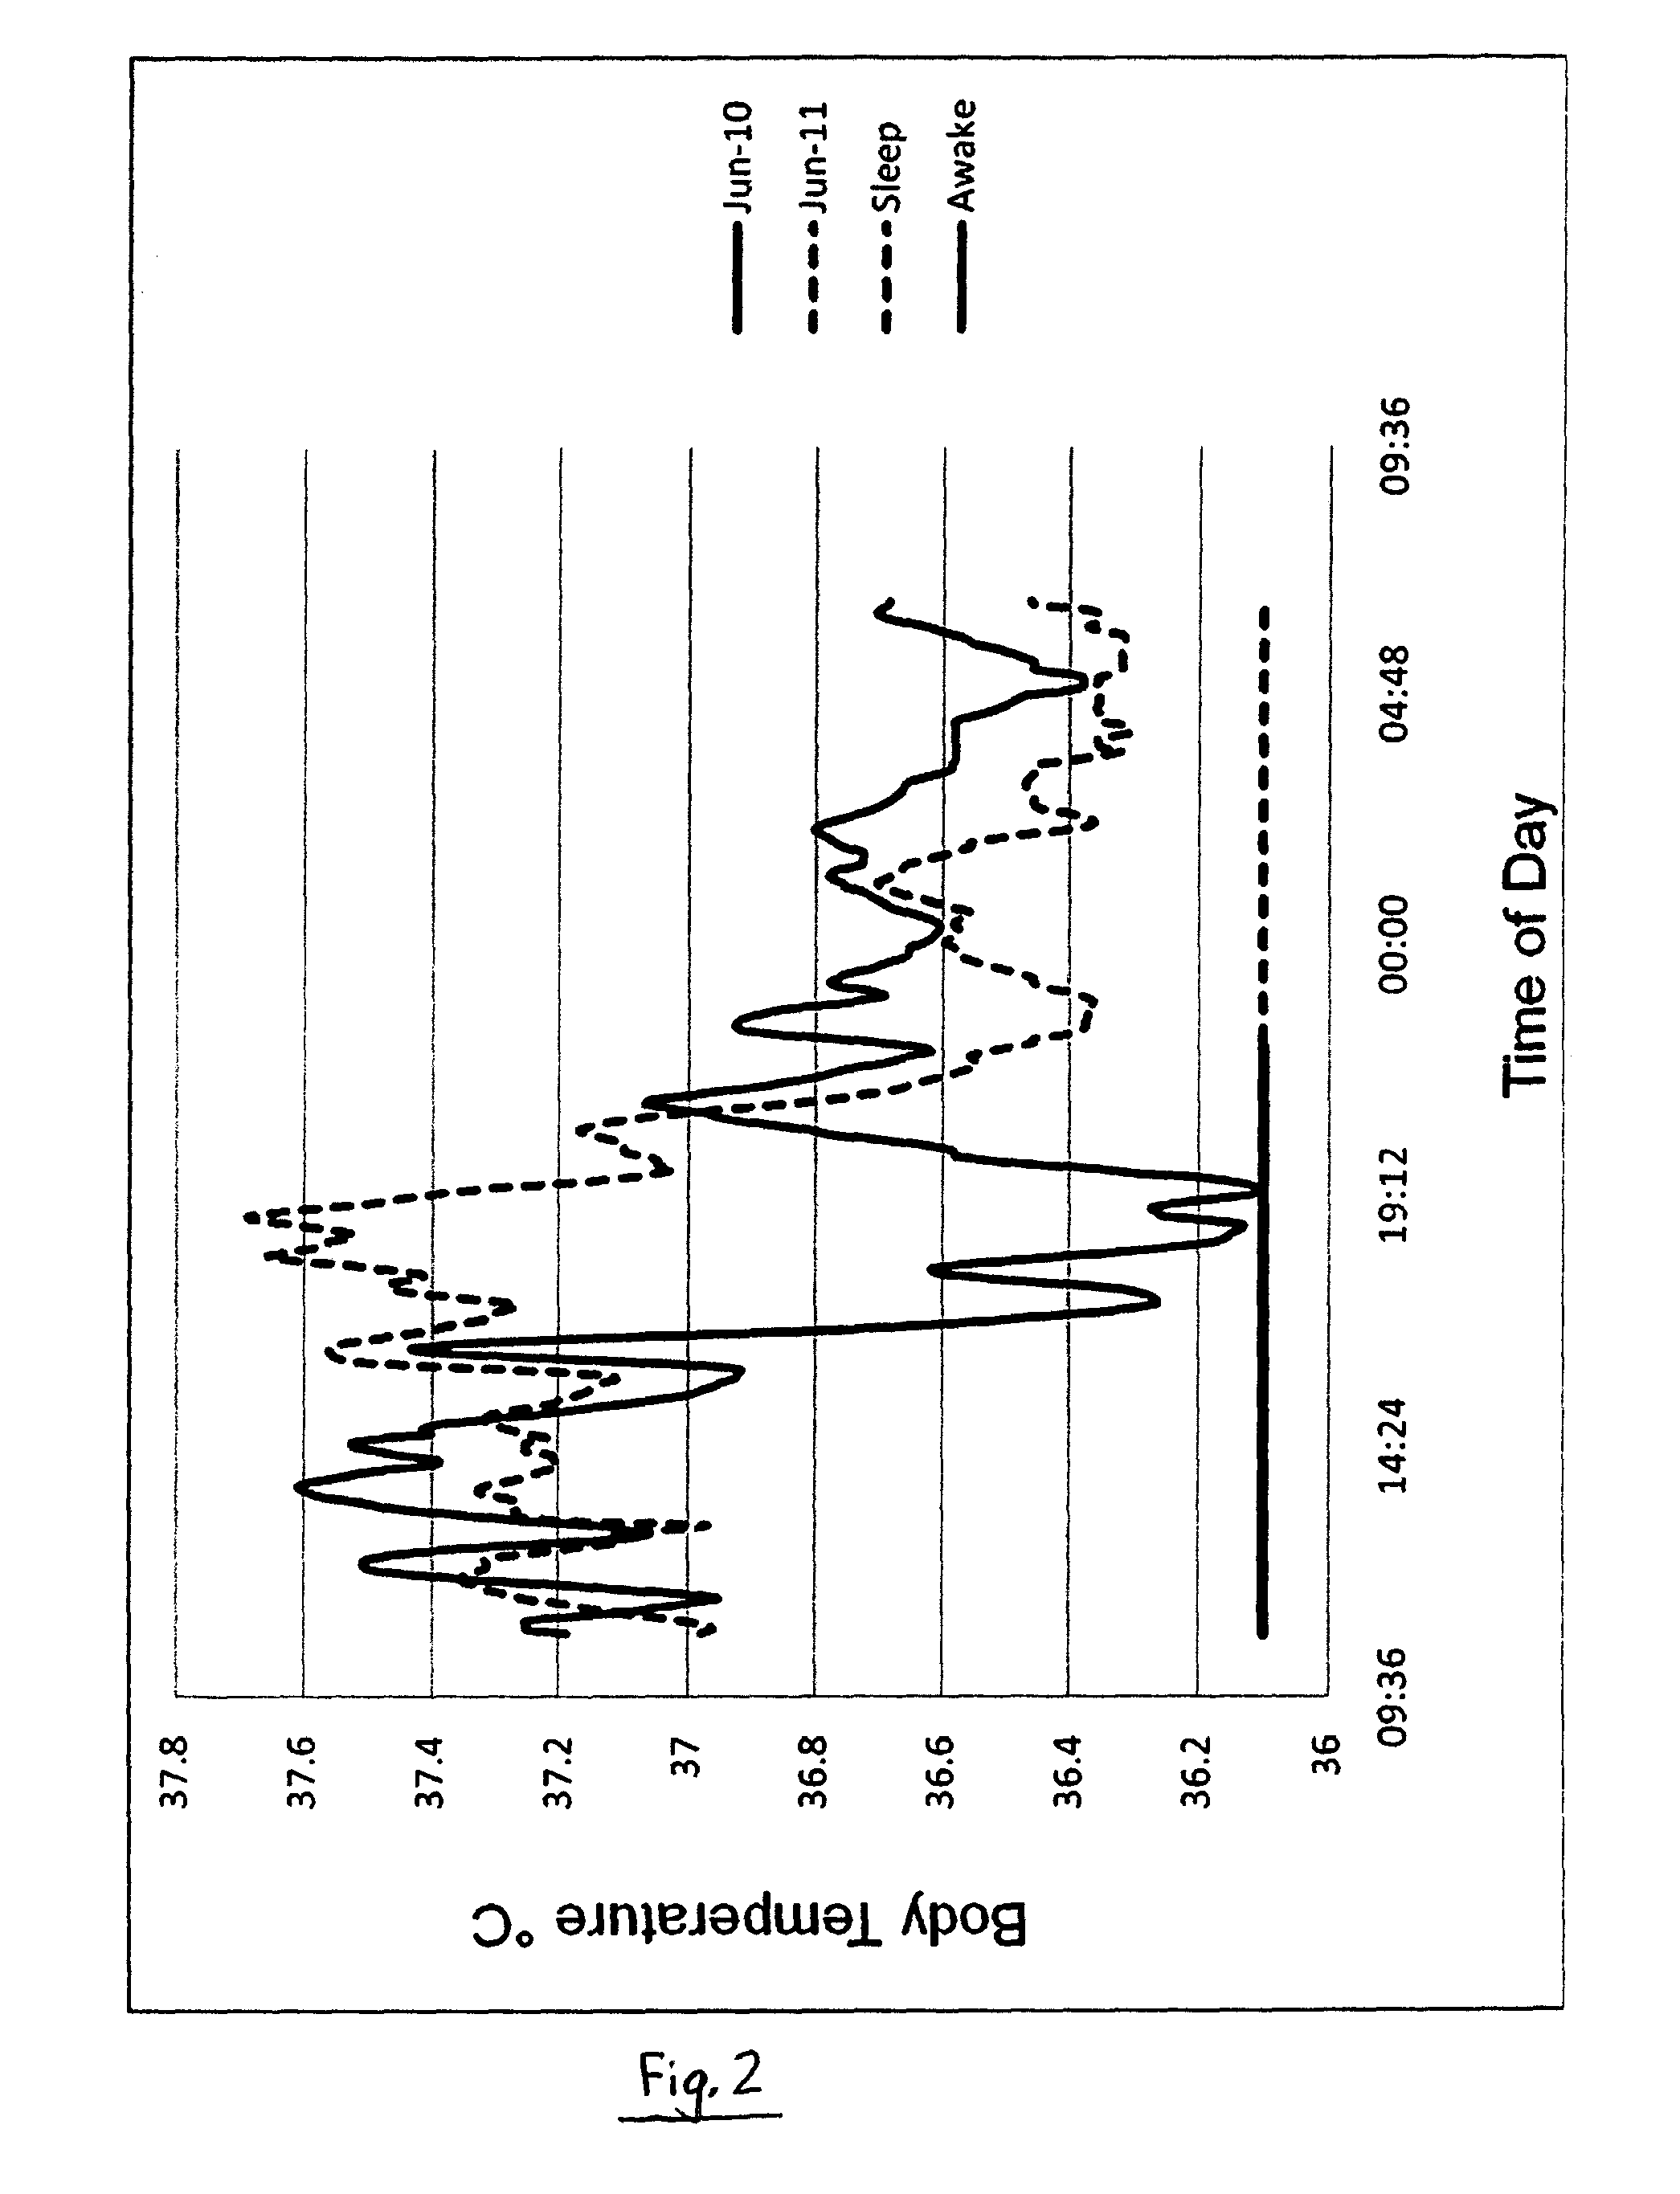 Method of detecting and predicting ovulation and the period of fertility